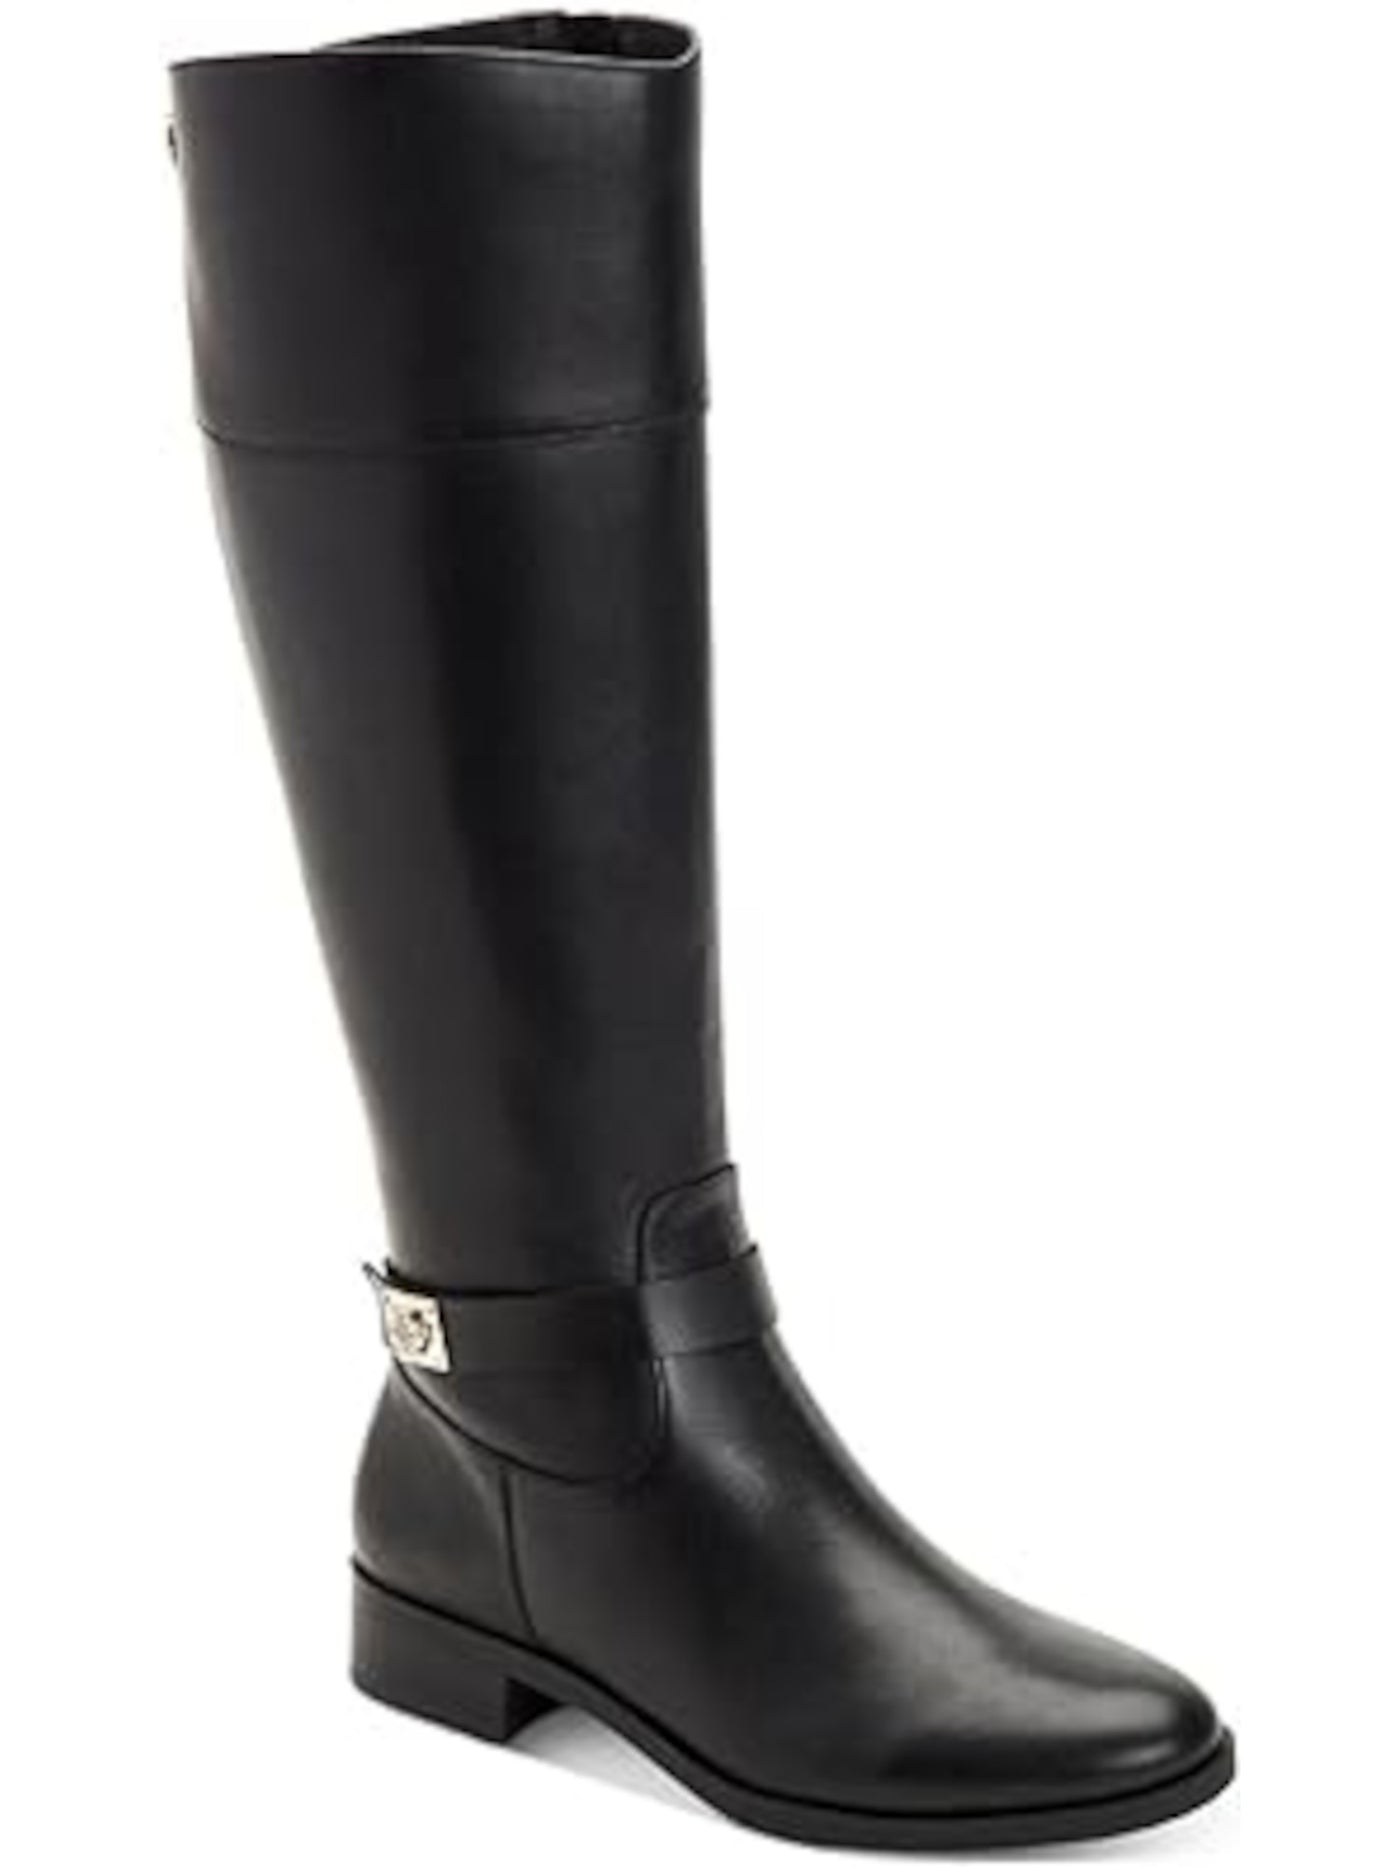 CHARTER CLUB Womens Black Buckle Accent Johannes Round Toe Zip-Up Riding Boot 8.5 M